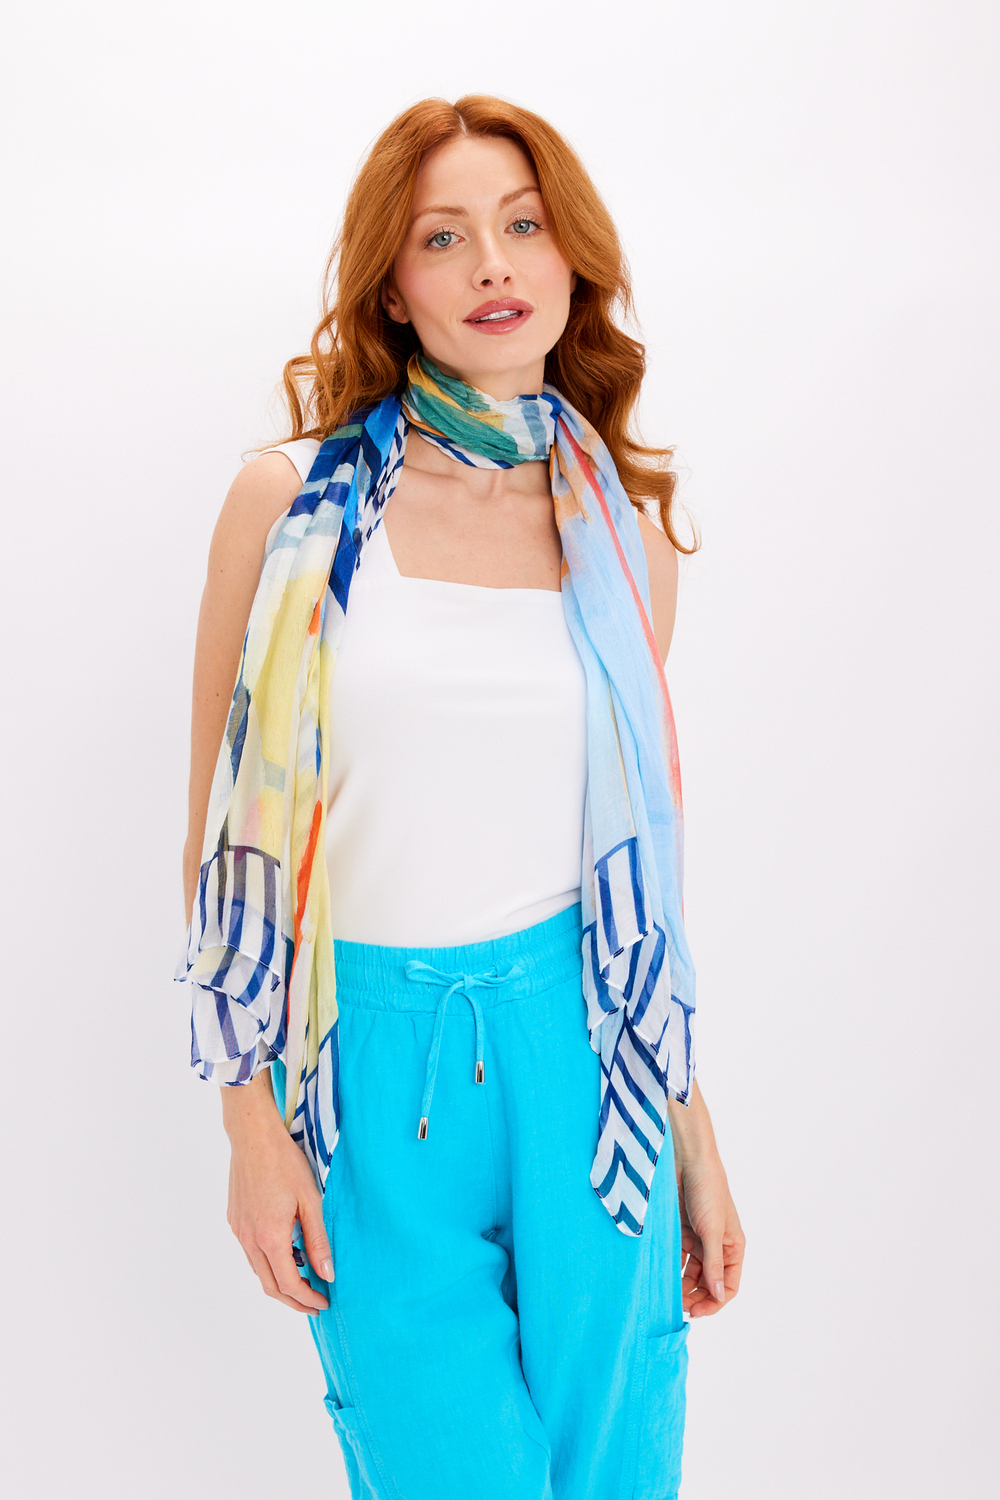 Abstract Feminine Casual Scarf Style 24917-6609. As Sample